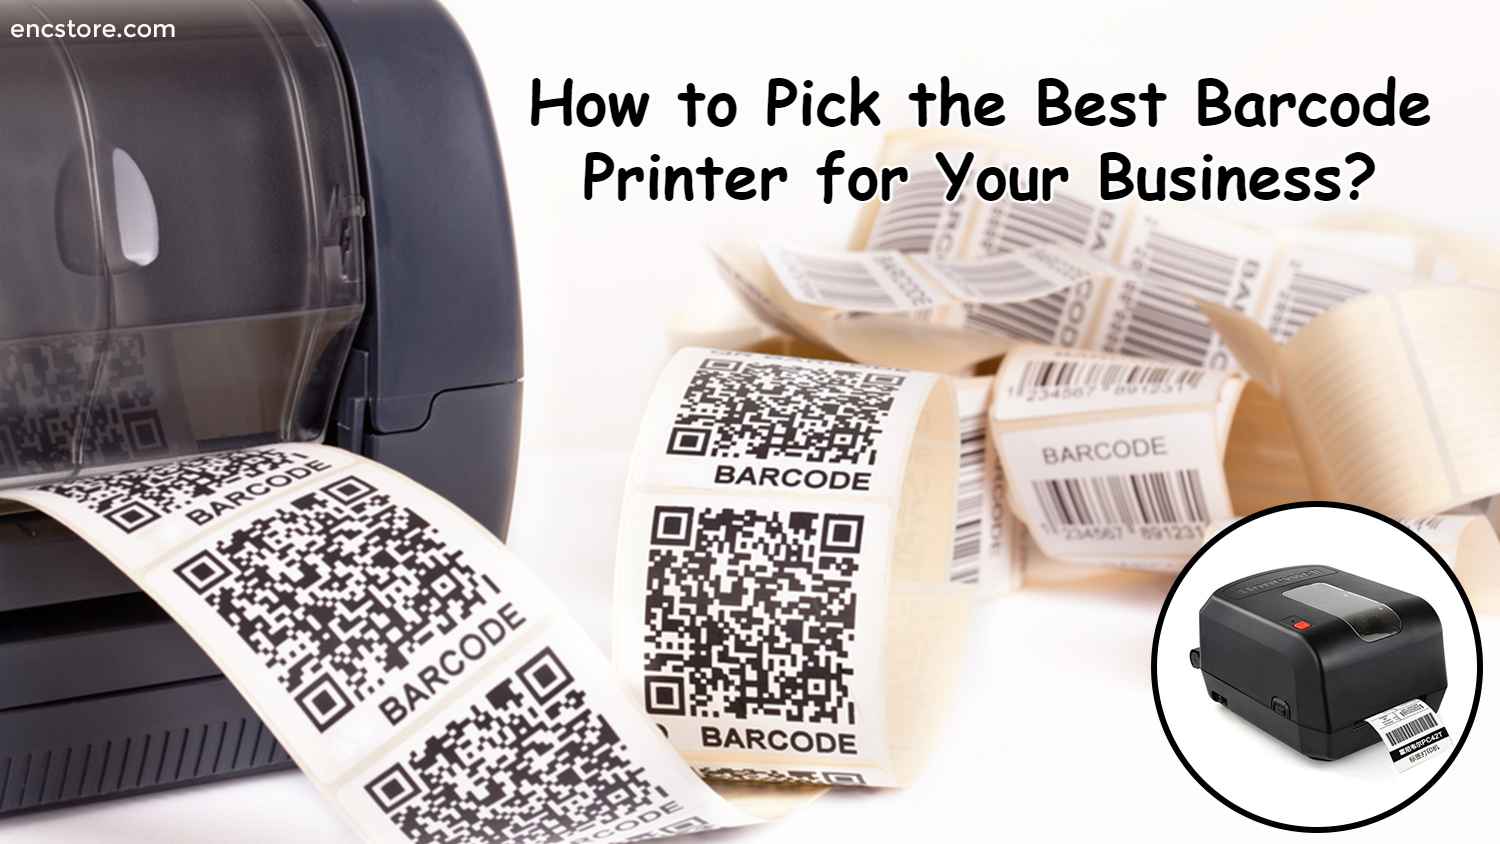 How to Pick the Best Barcode Printer for Your Business?